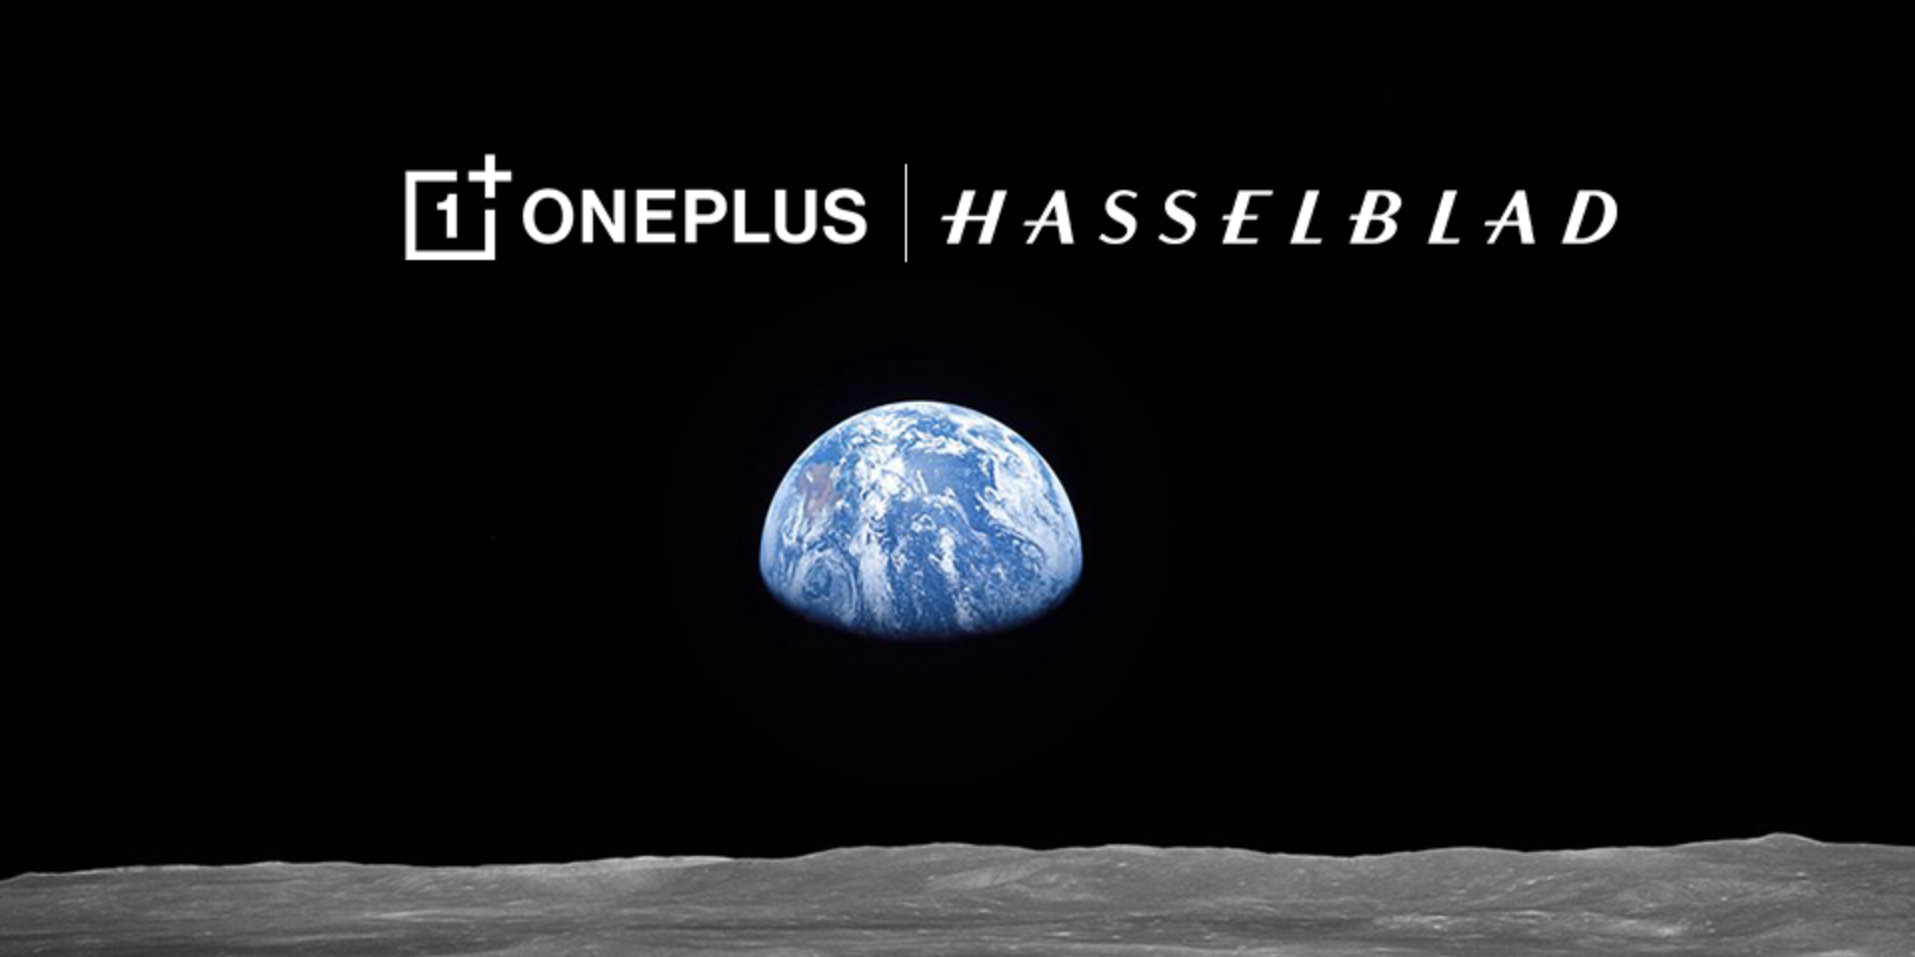 OnePlus and Hasselblad promo image